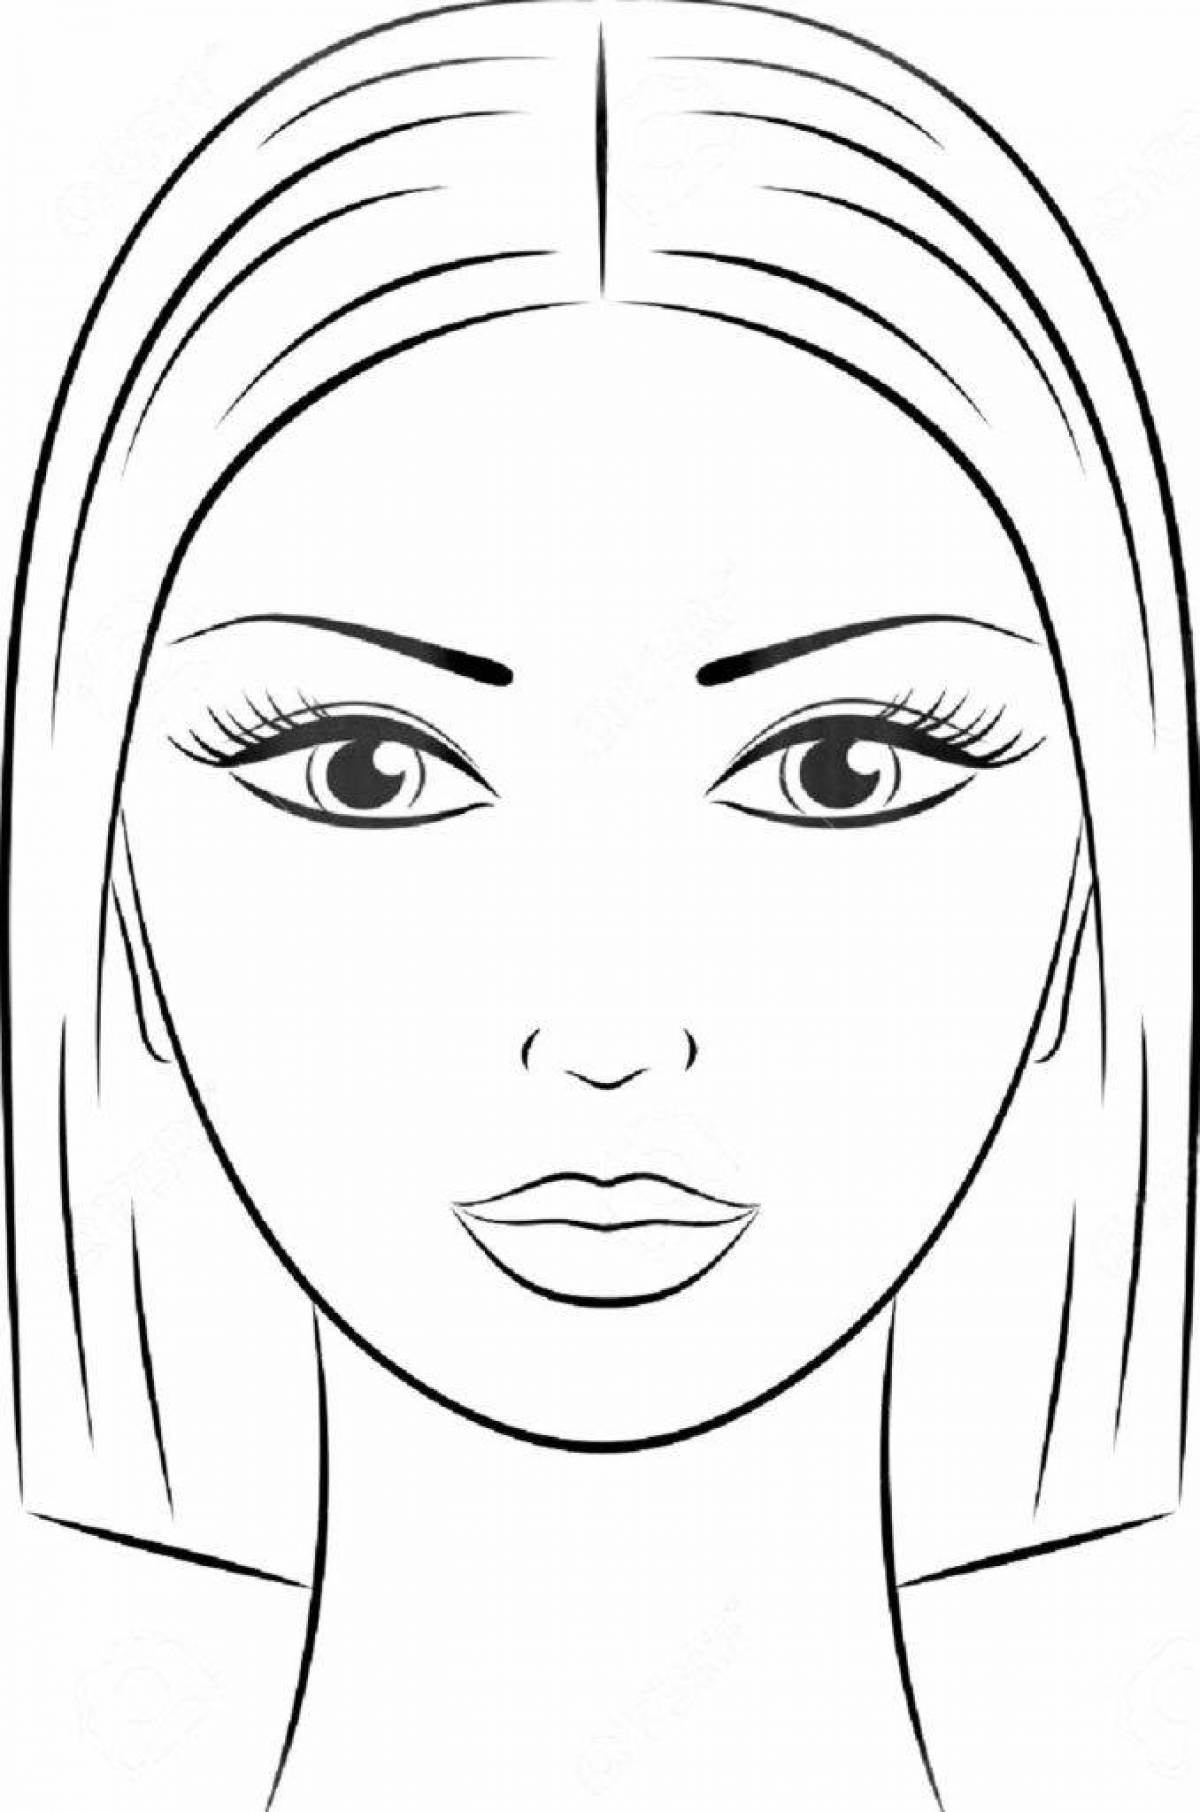 Glitzy coloring page face makeup for girls